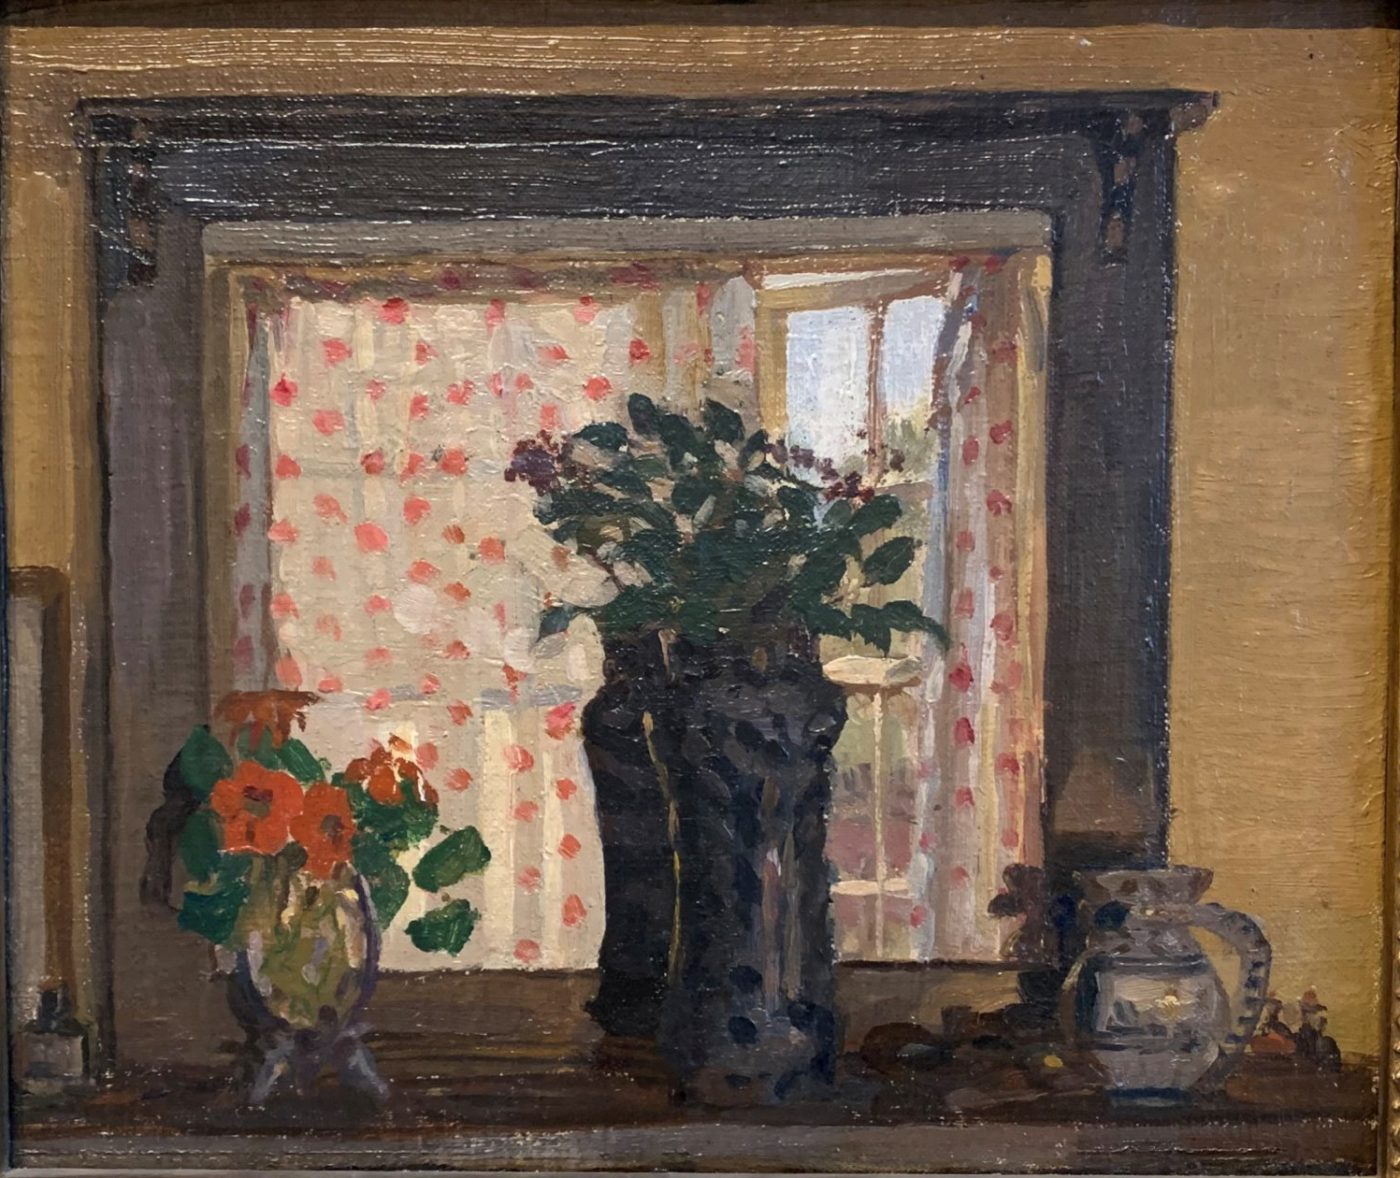 Harold Gilman (1876-1919), A Vase of Flowers on a Sideboard with a mirror behind